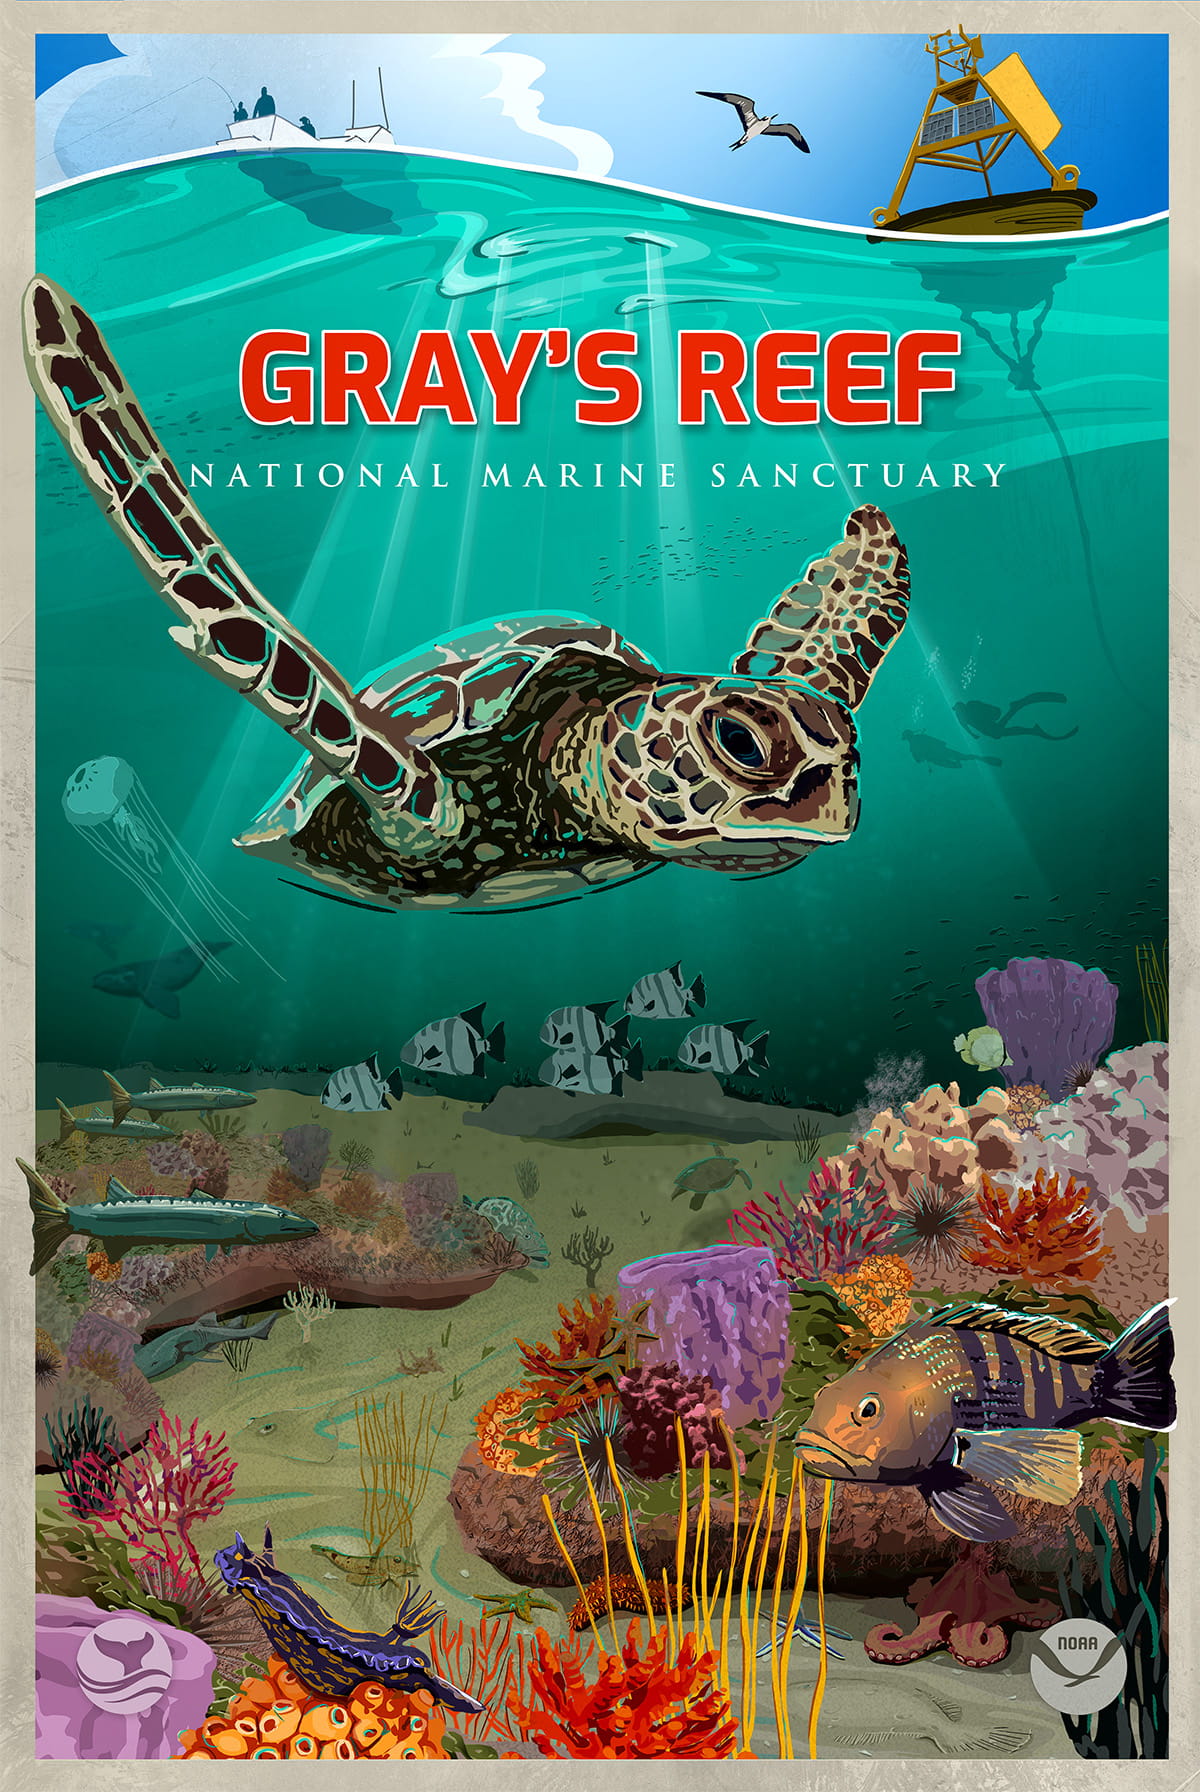 Gray's Reef is a marine oasis. On the surface, recreational anglers try for grouper, sea bass, and snapper, while a northern gannet flies overhead, and a NOAA weather buoy collects data. Beneath the waves, divers share the waters with a host of colorful tunicates, sponges, soft corals, and other residents of the live-bottom reef, like a loggerhead sea turtle, octopuses, nurse sharks, schools of spadefish, jellyfish, and North Atlantic right whales.